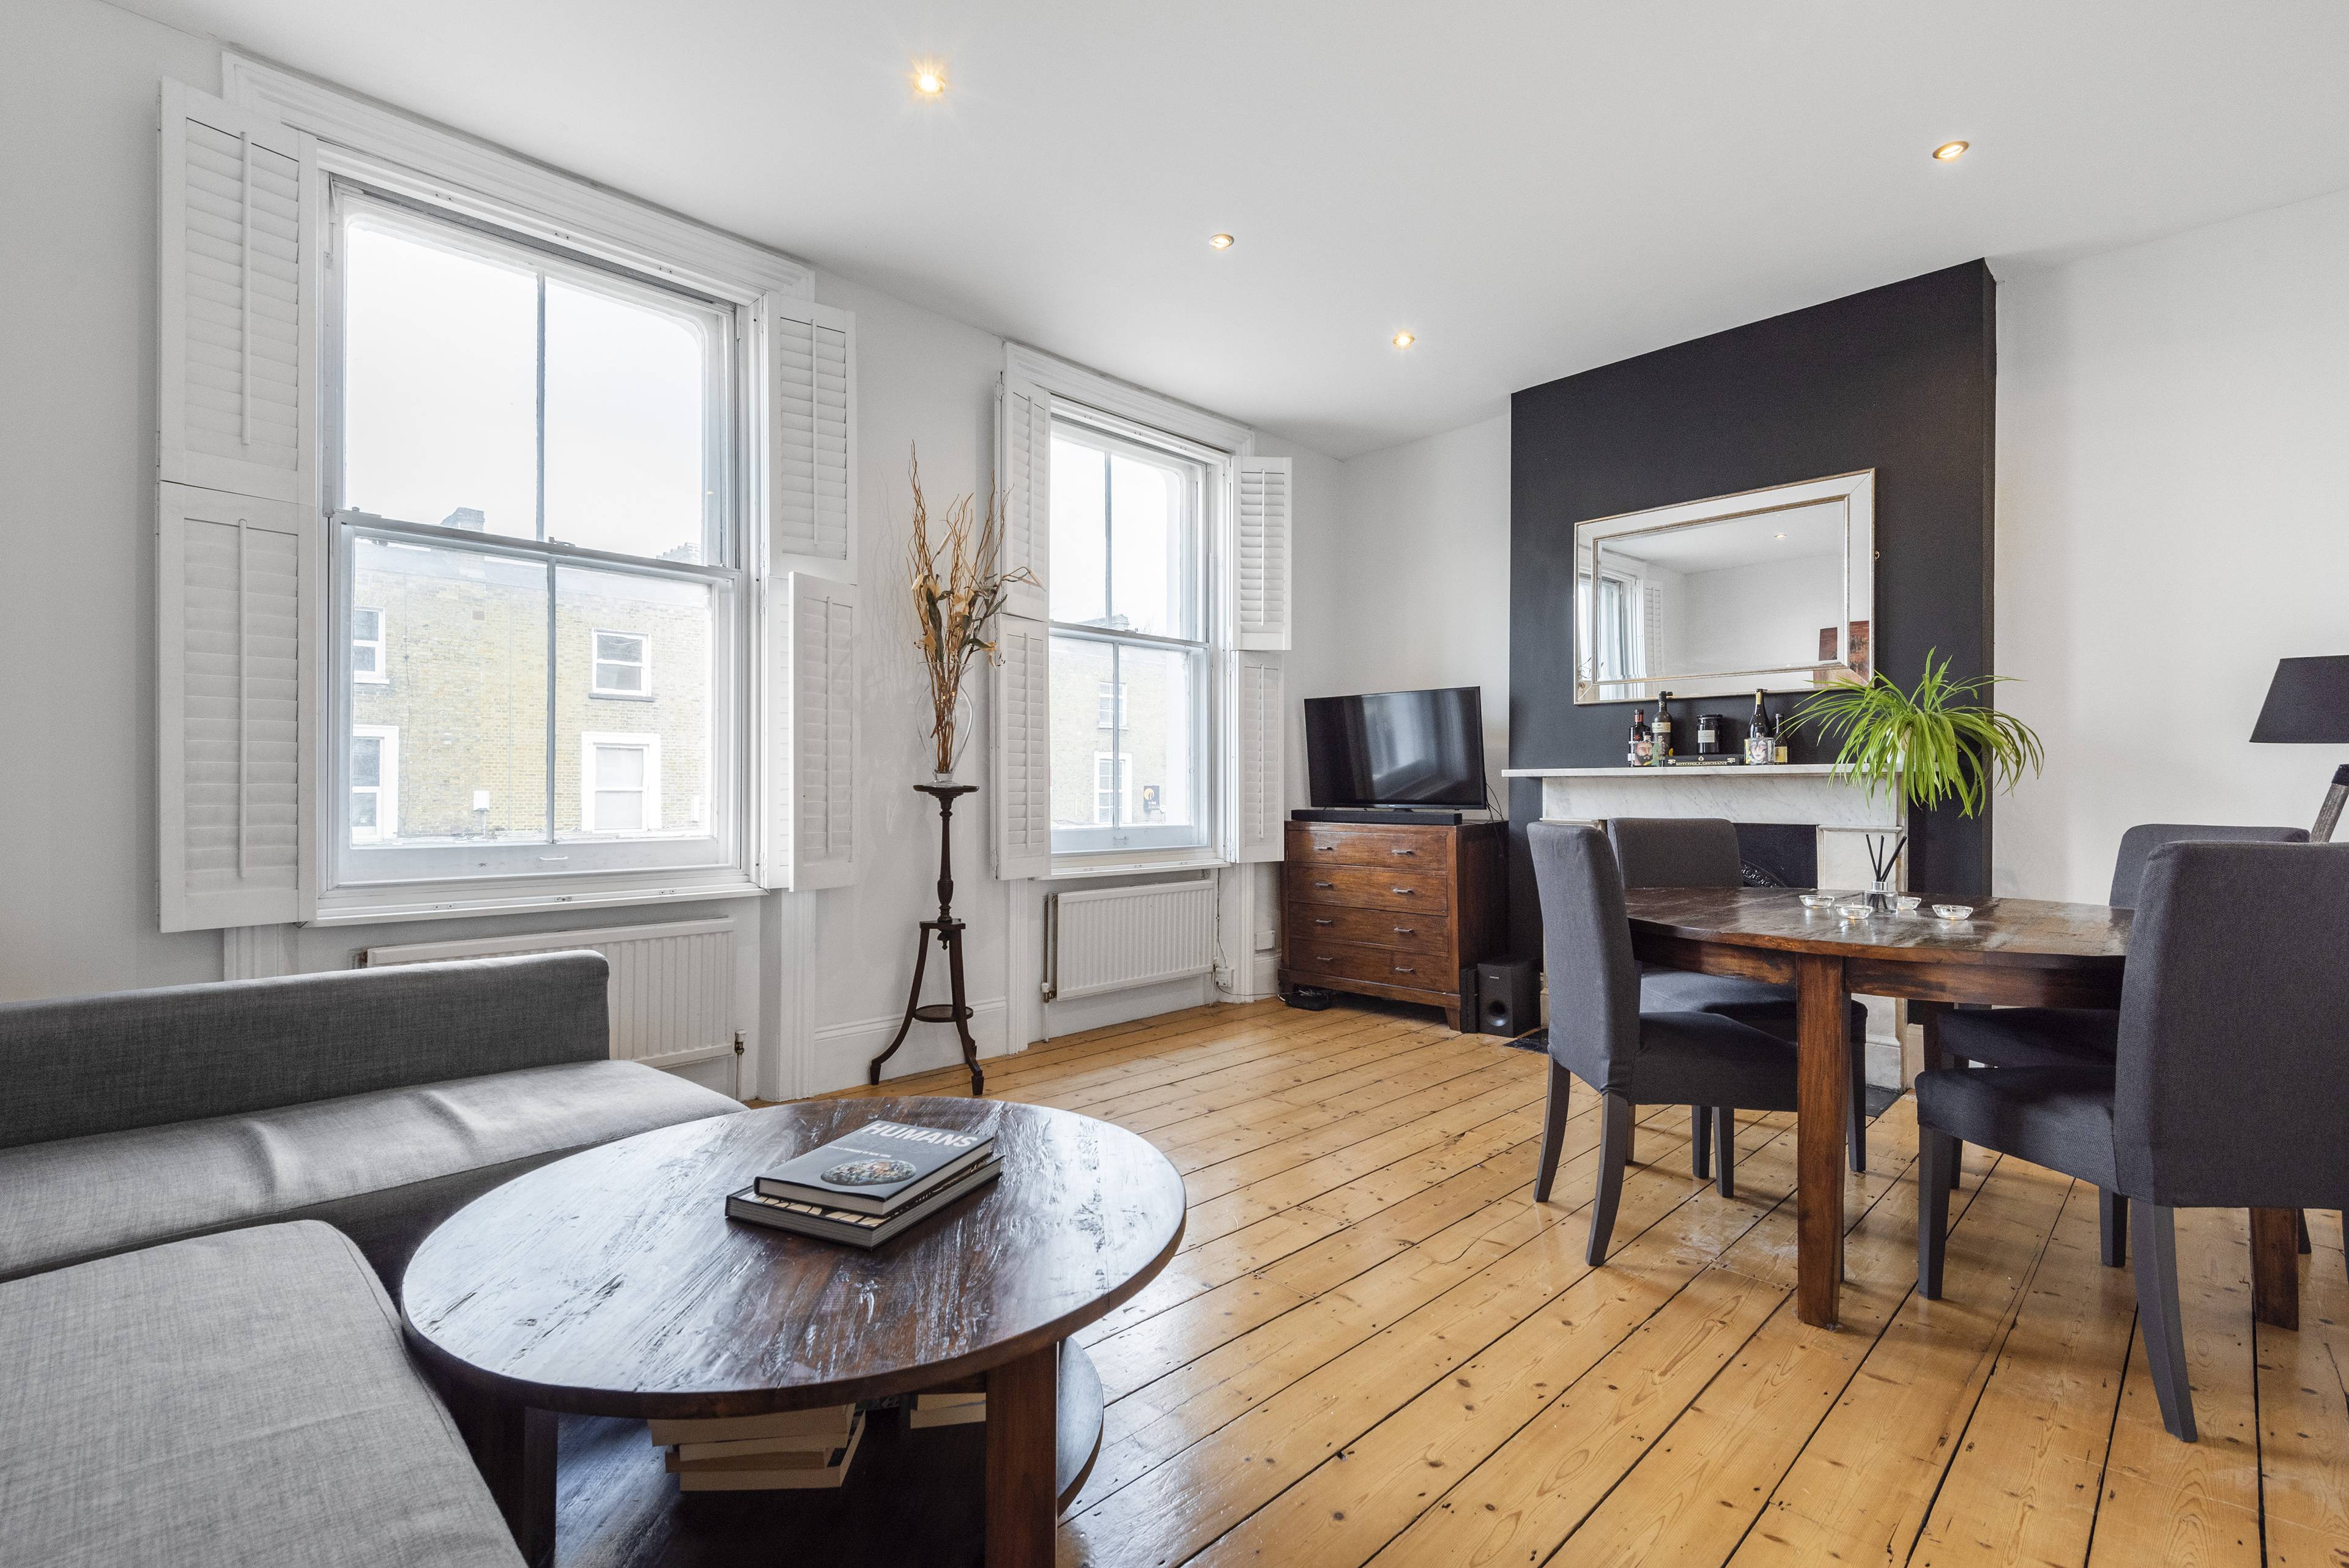 Bright and spacious first-floor apartment in a period property with a fabulous private roof terrace and off-street allocated parking